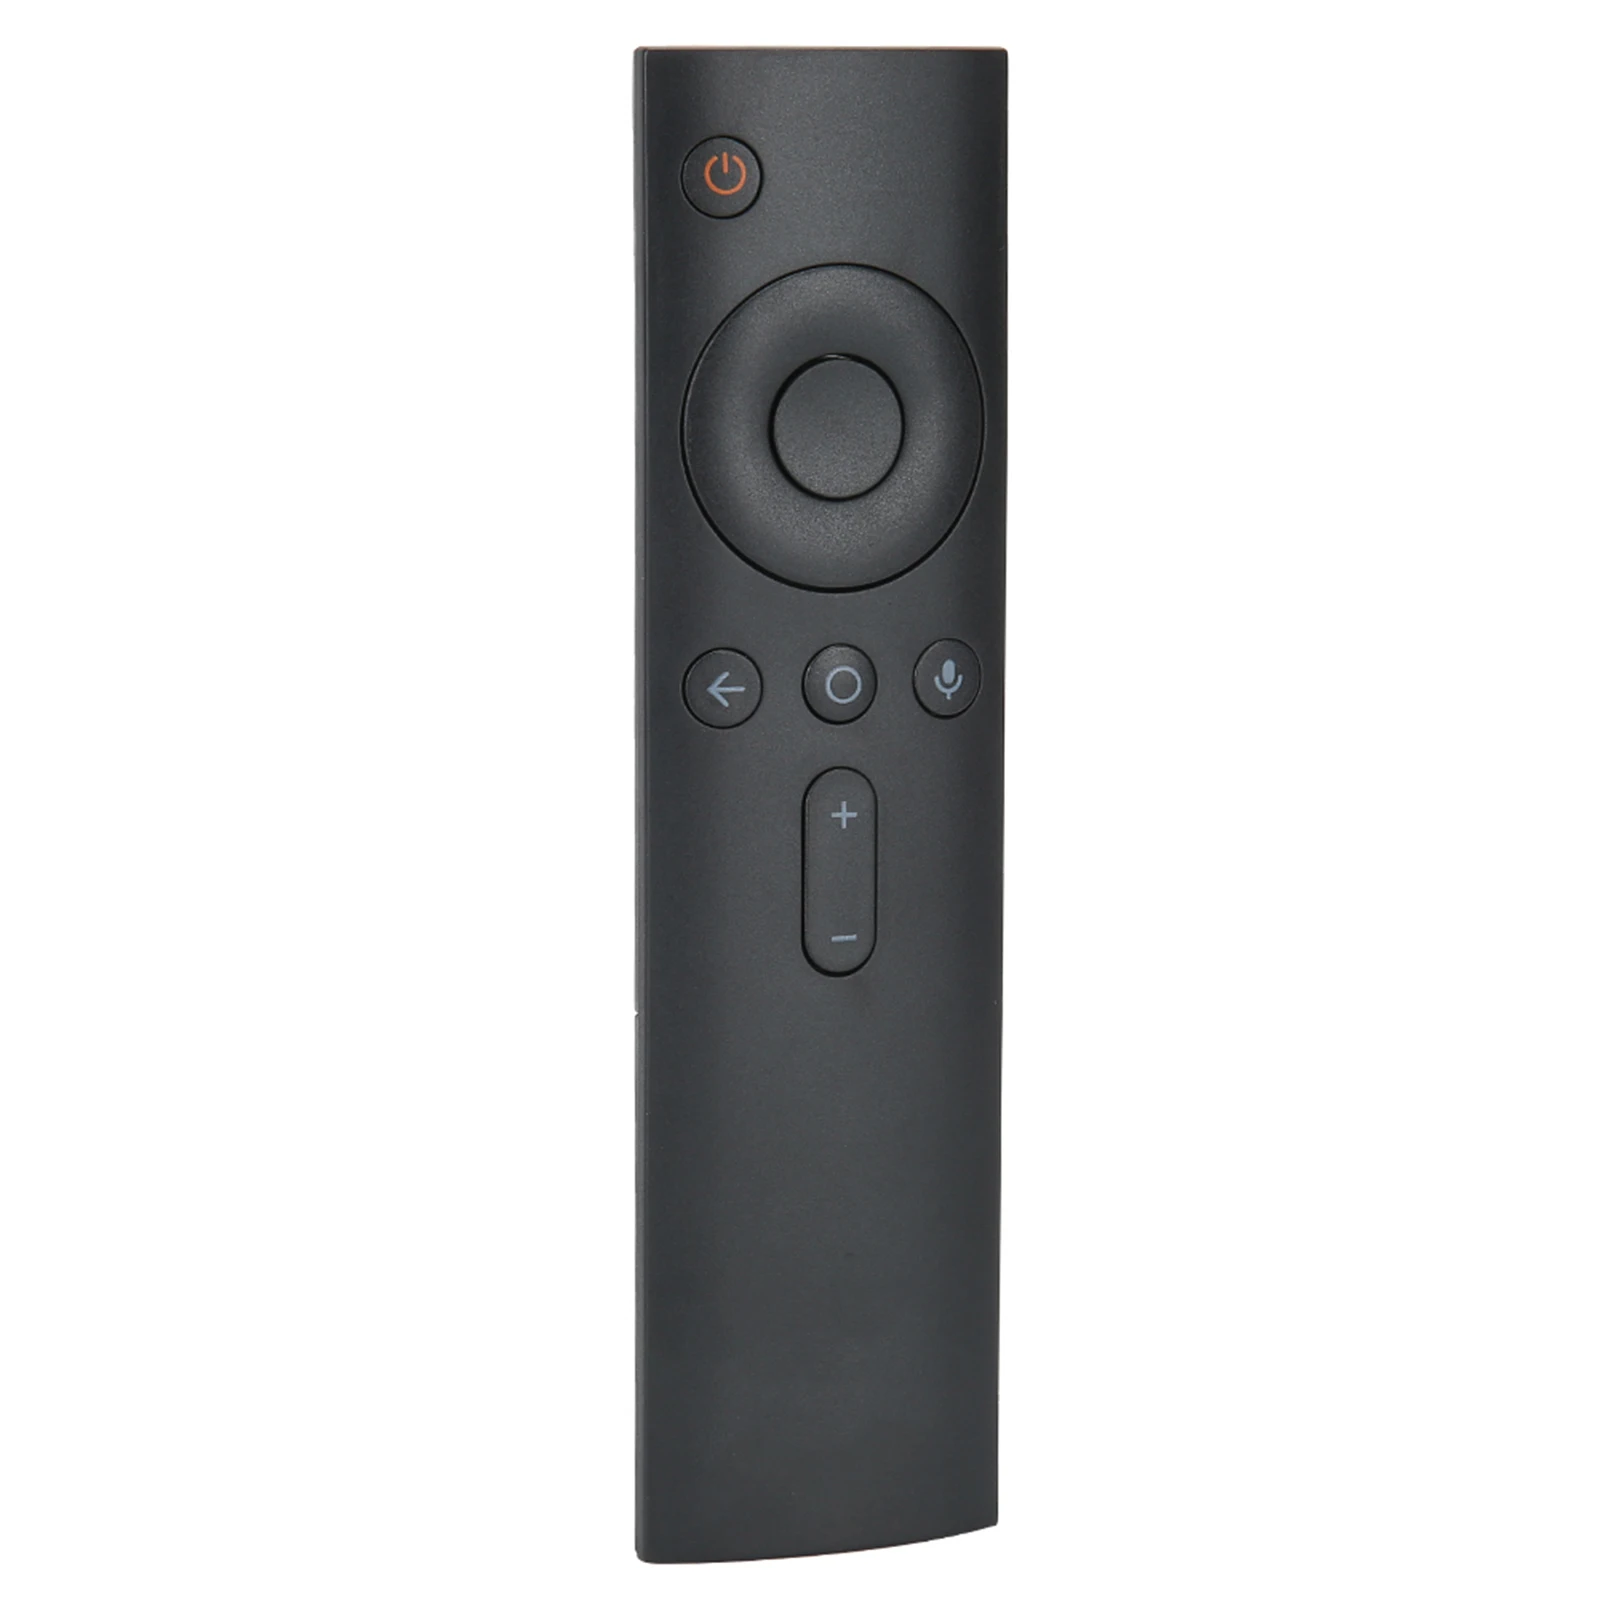 Durable ABS Shell Bluetooth Voice Remote Control Replacement Fits for Xiaomi Mi BOX 3 images - 6